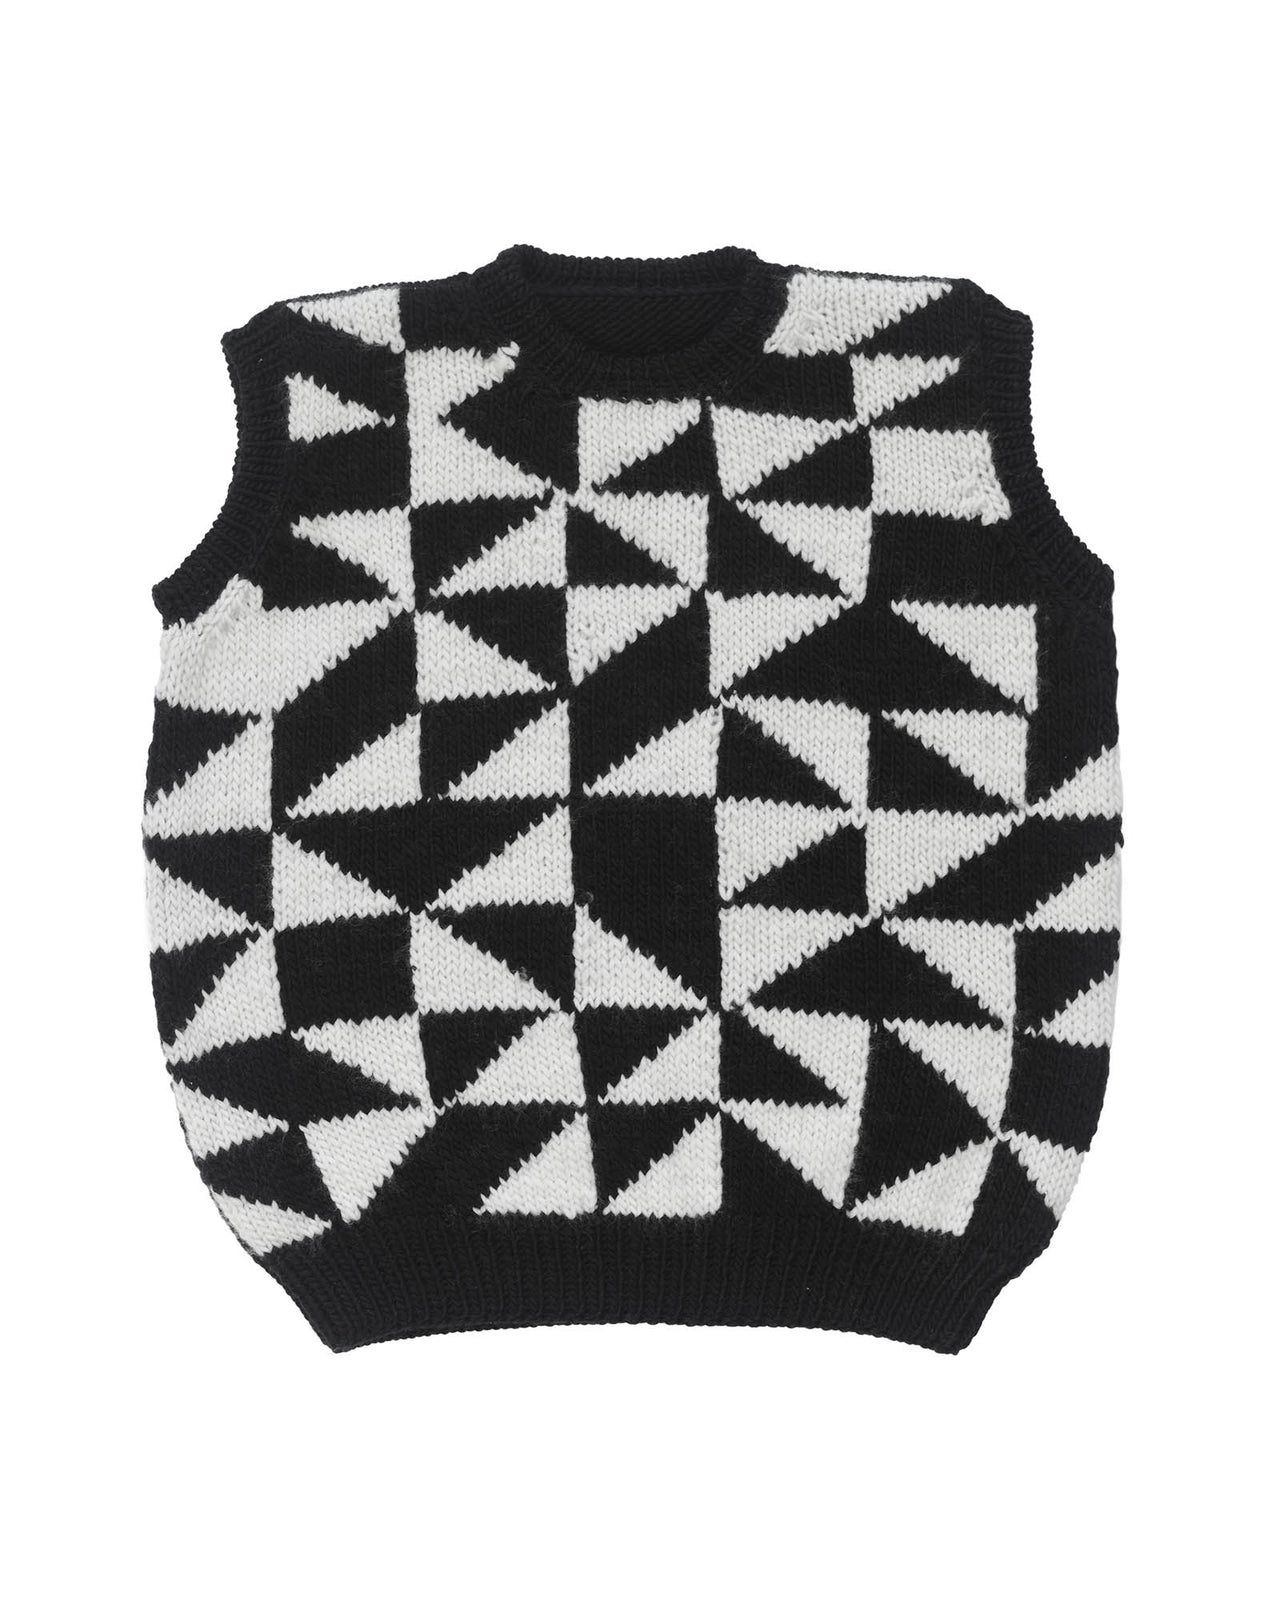 Wool vest laid flat on white background. The vest has black and white triangular patterns on the front.